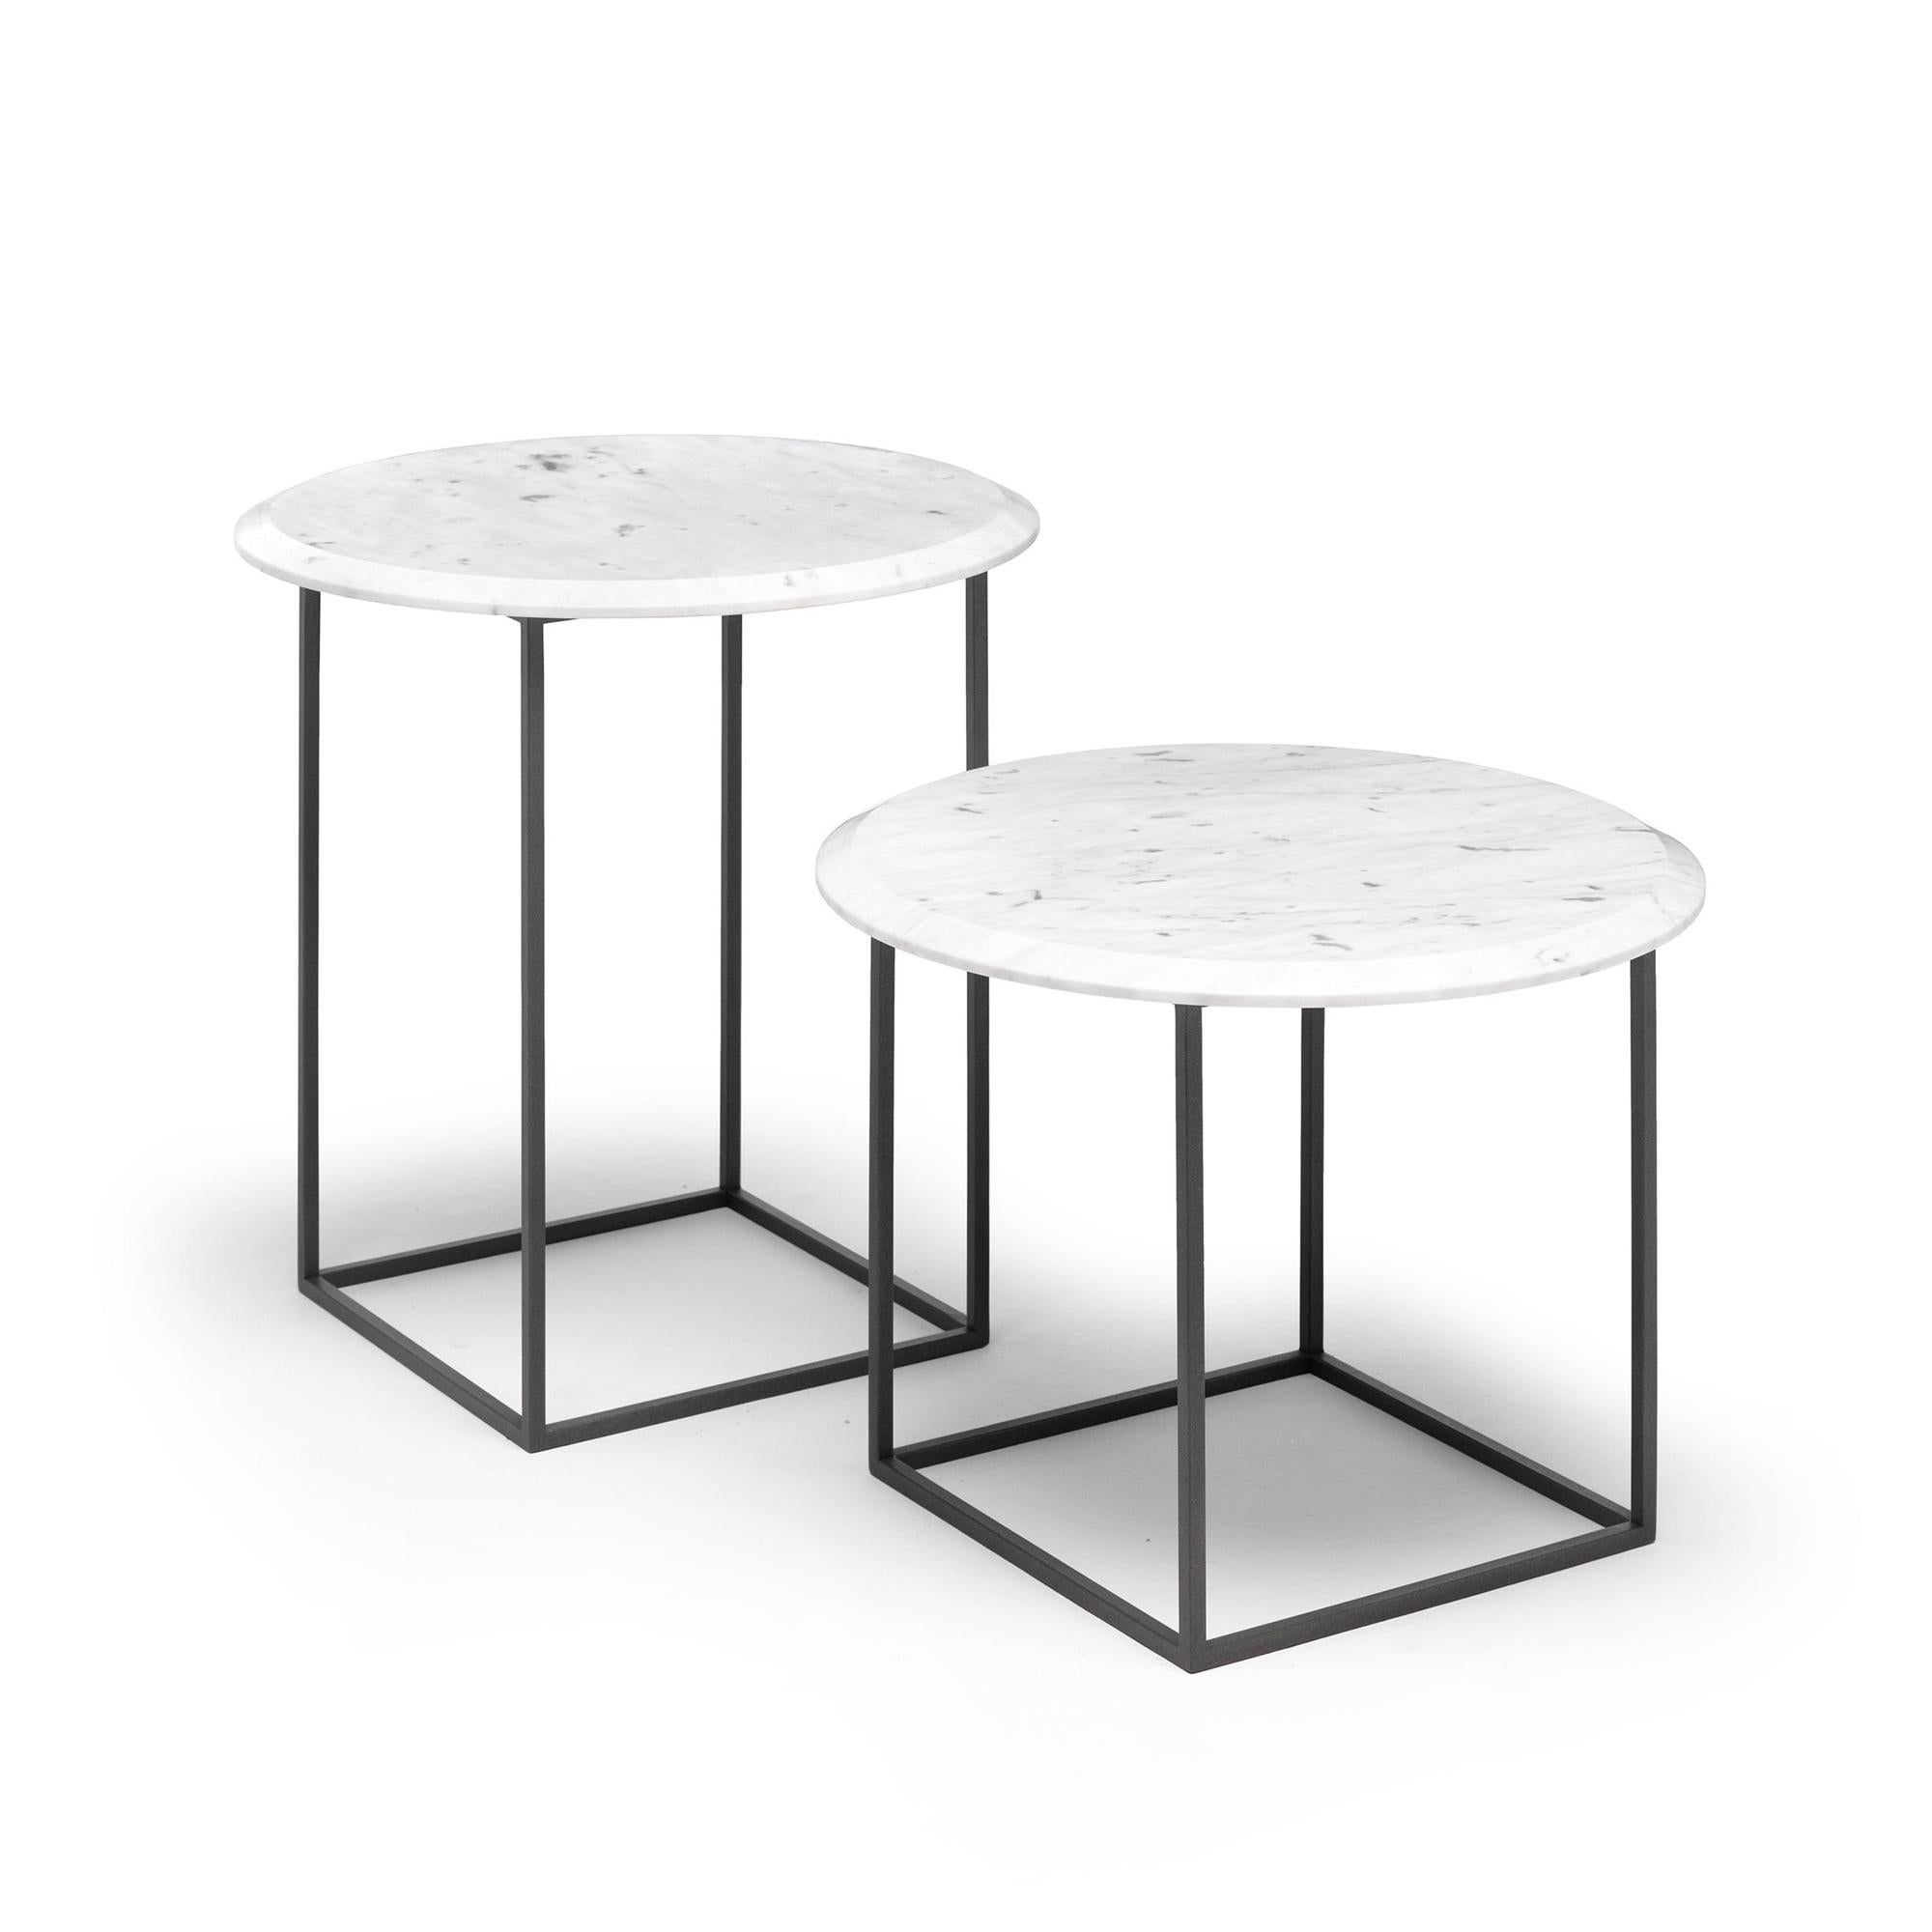 The MT sidetable/nightstand is simple and rich at the same time. The base is made with a very thin squared metal tubing which results in physically and visually light and clean geometric structure. The circular top is thick solid marble made